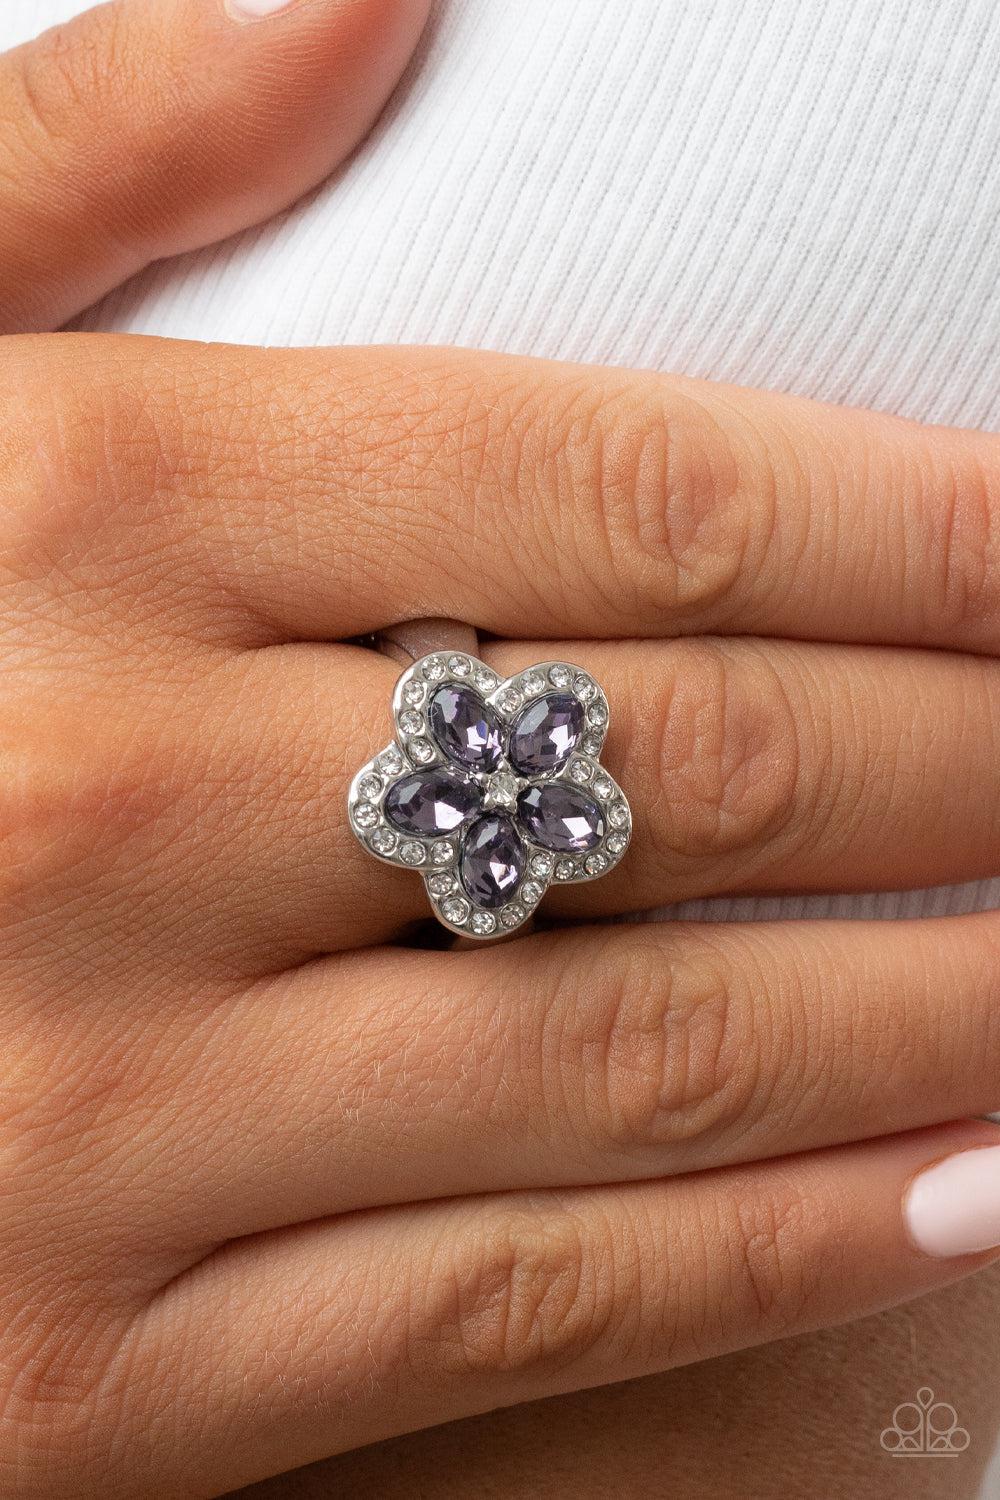 Efflorescent Envy Purple Rhinestone Flower Ring - Paparazzi Accessories-on model - CarasShop.com - $5 Jewelry by Cara Jewels